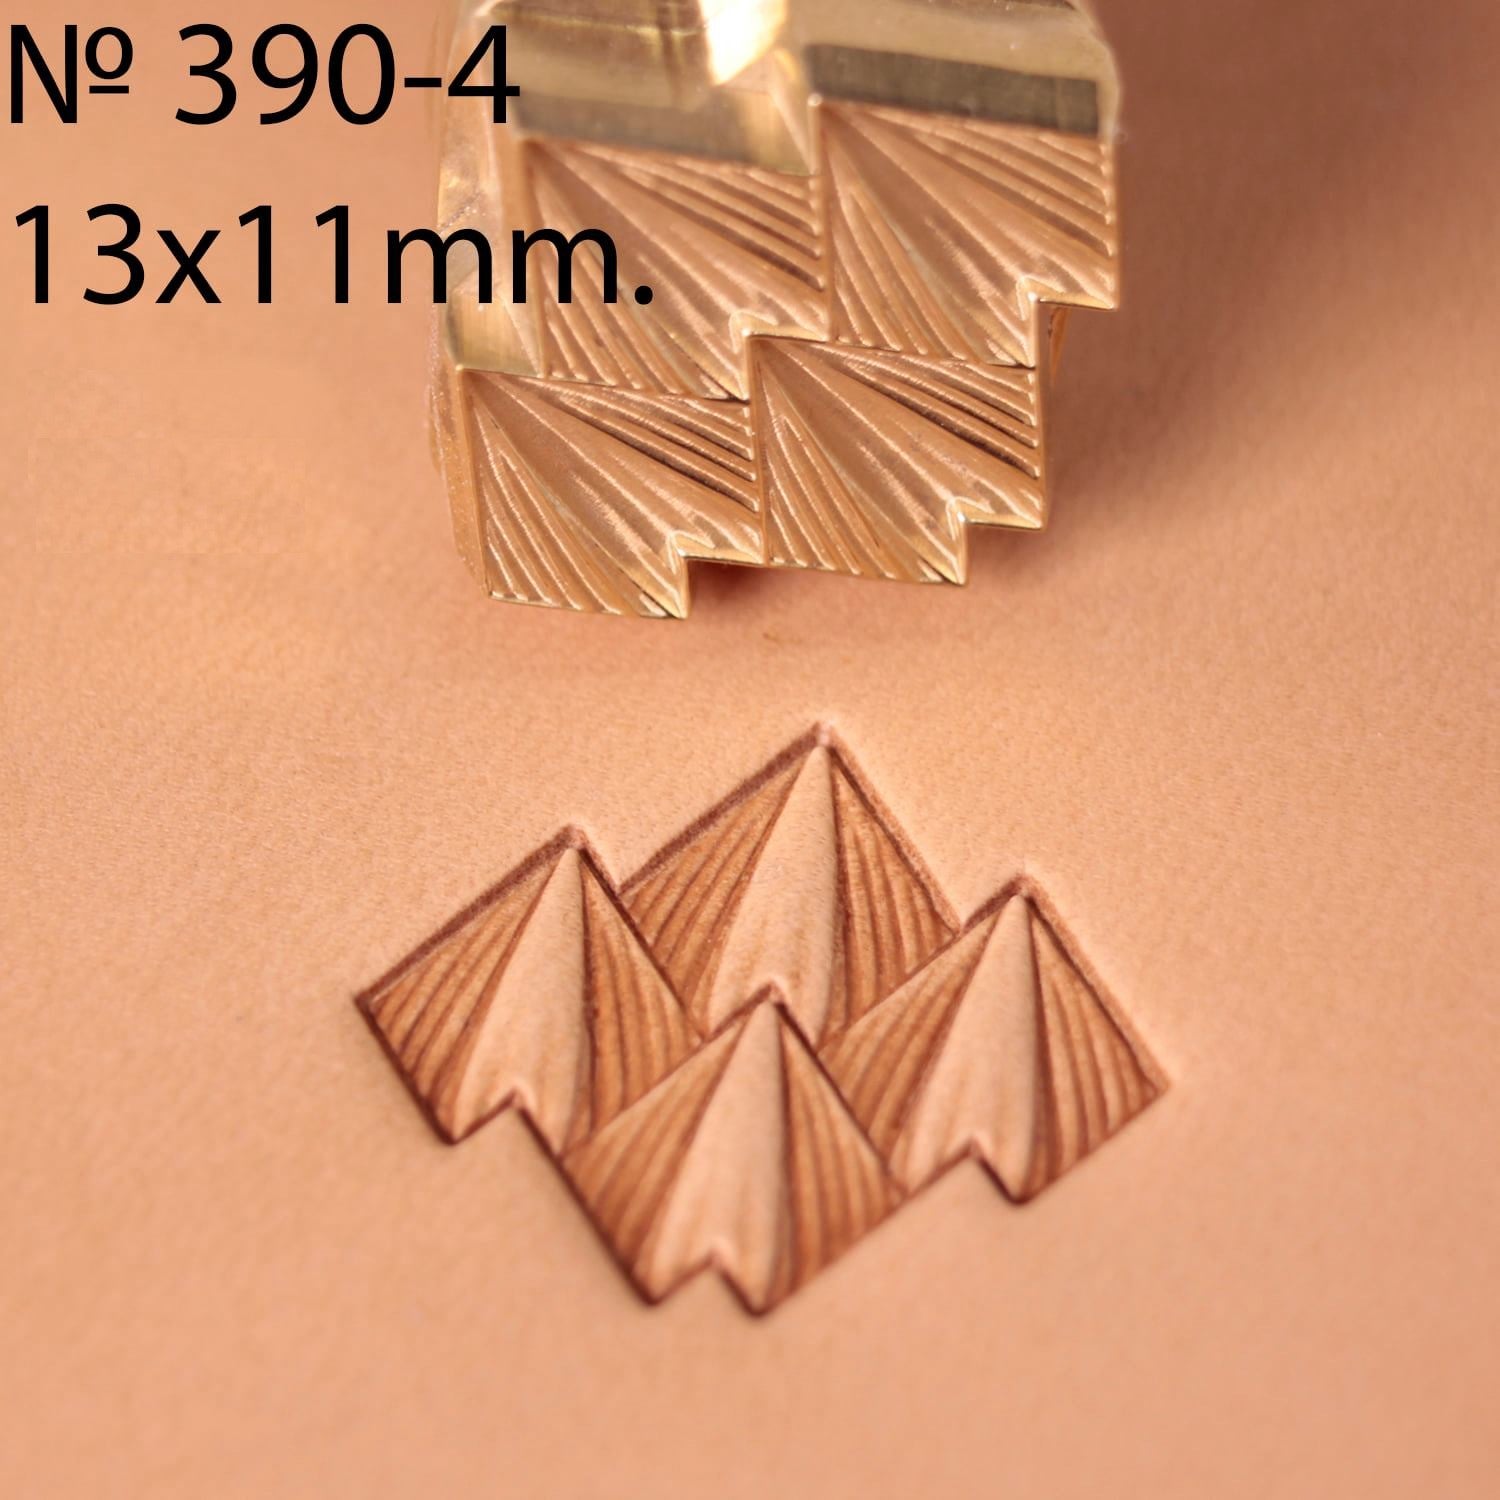 Leathercrafting Stamp Tools - Scale #390-4